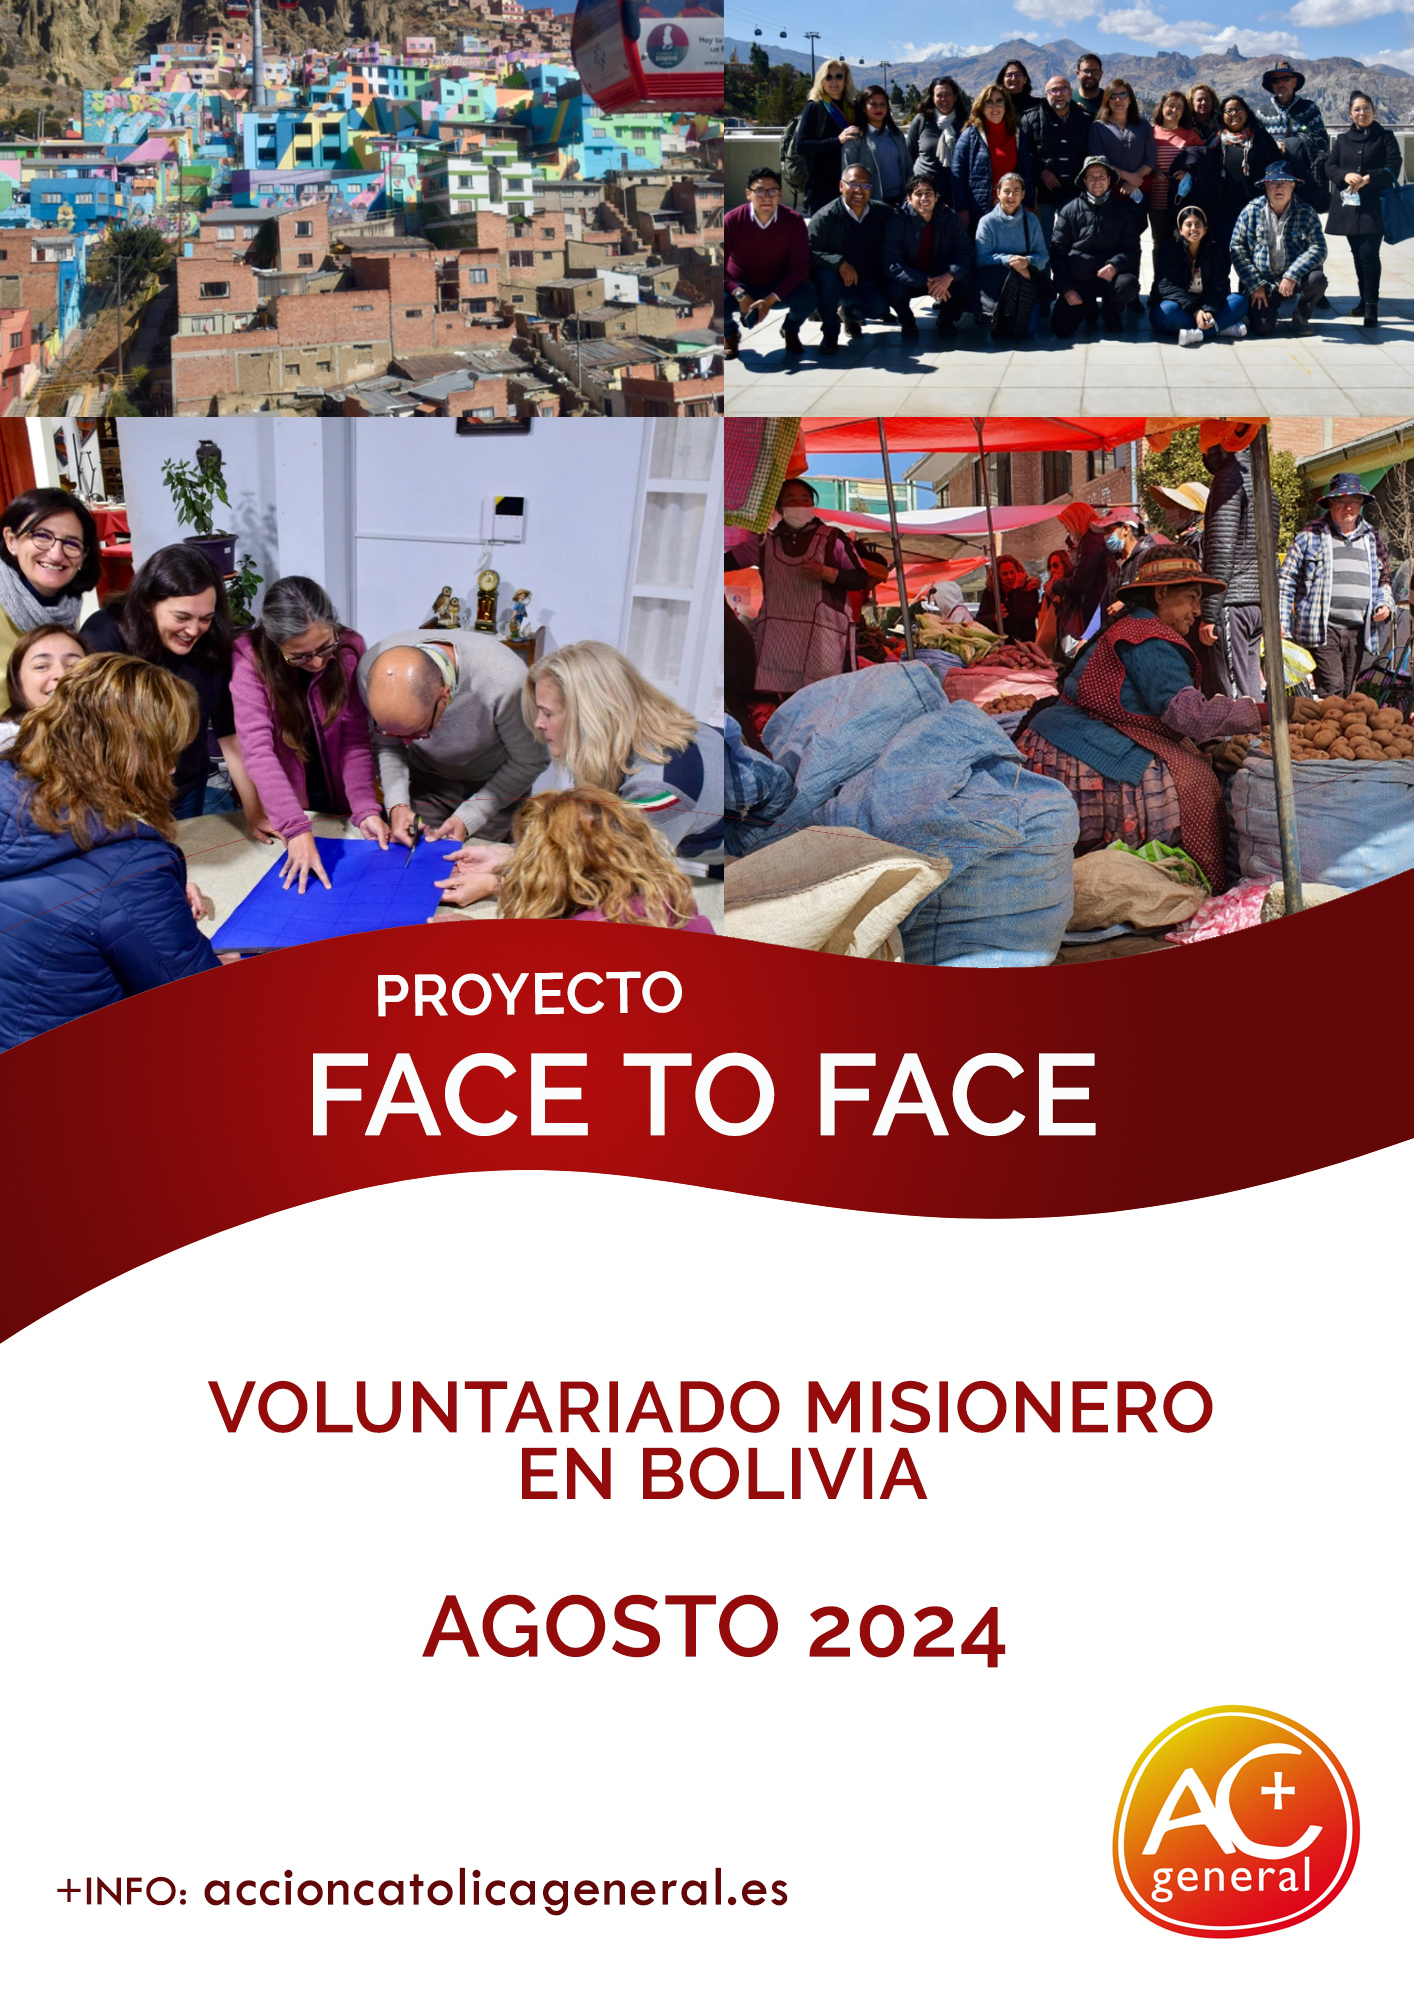 PROYECTO FACE TO FACE